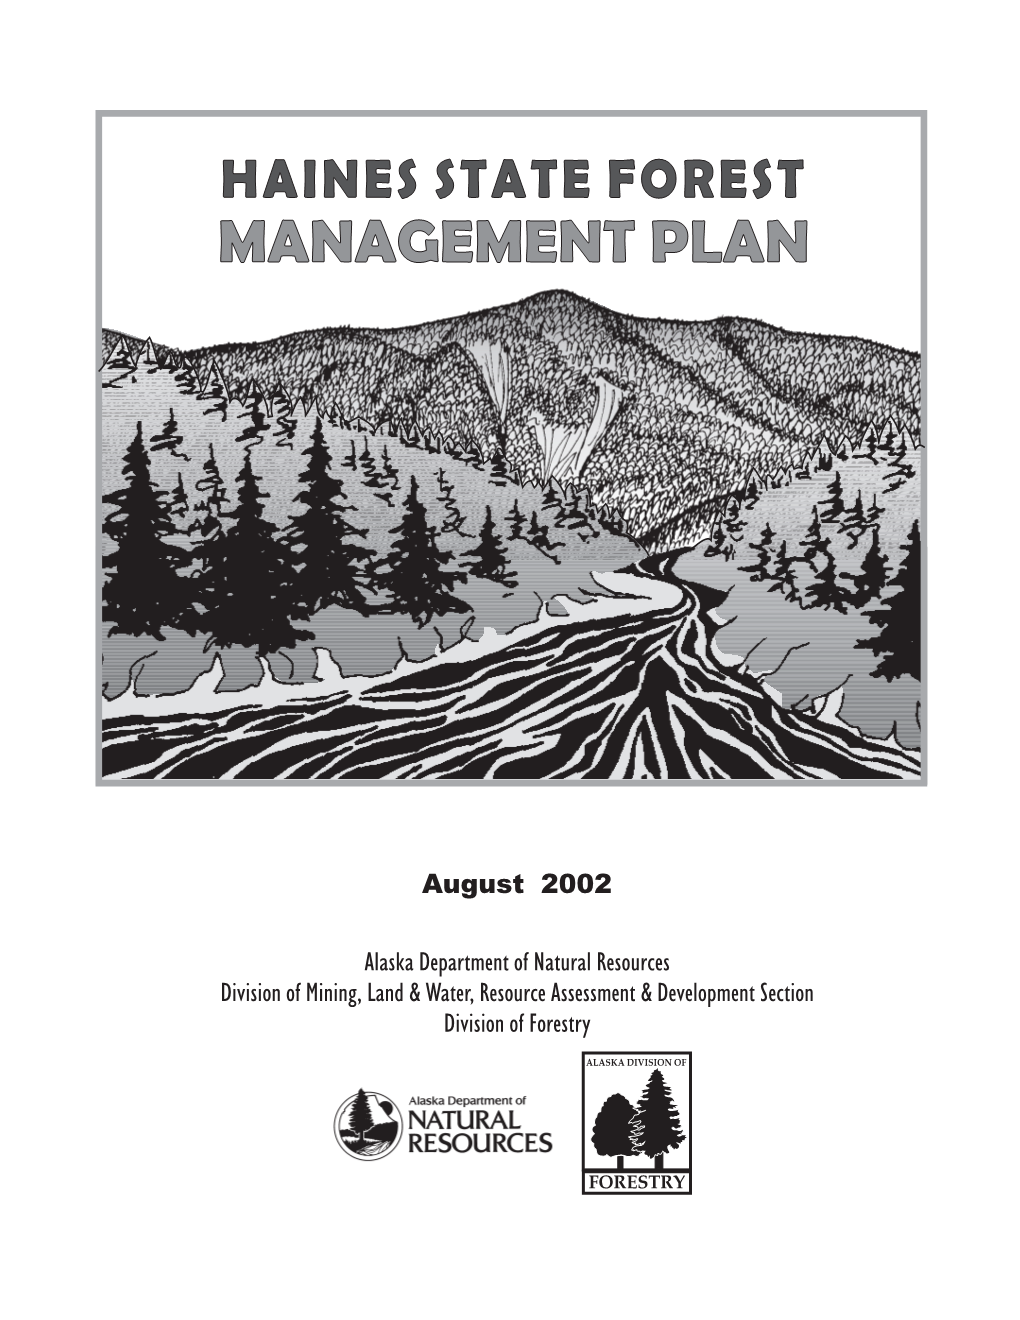 Haines State Forest Management Plan